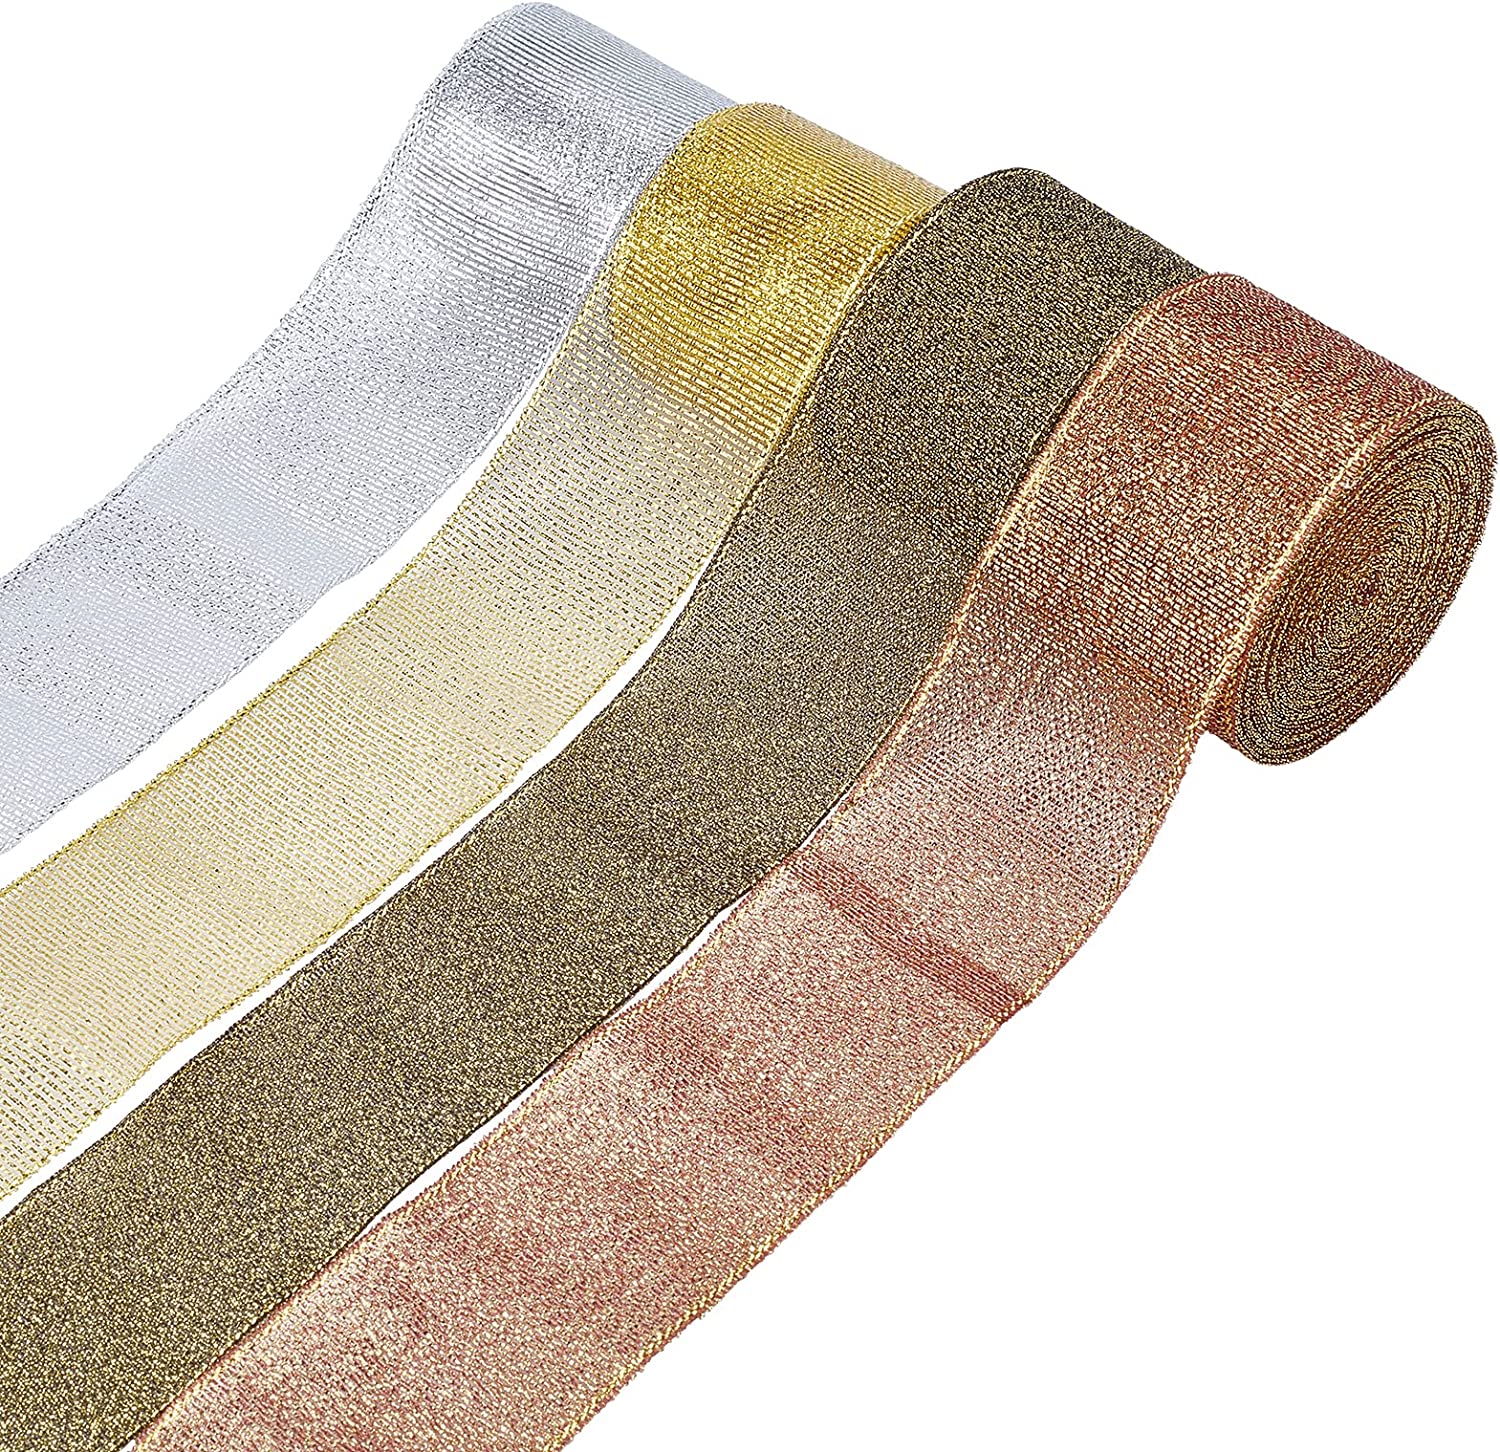 32 Yards 4 Colors Glitter Organza Ribbons, 1.5 Glitter Trimmings Ribbons Fabric Shimmer Ribbons with Glitter Powder for Gift Wrapping Arts Crafts and Party Wedding Accessories